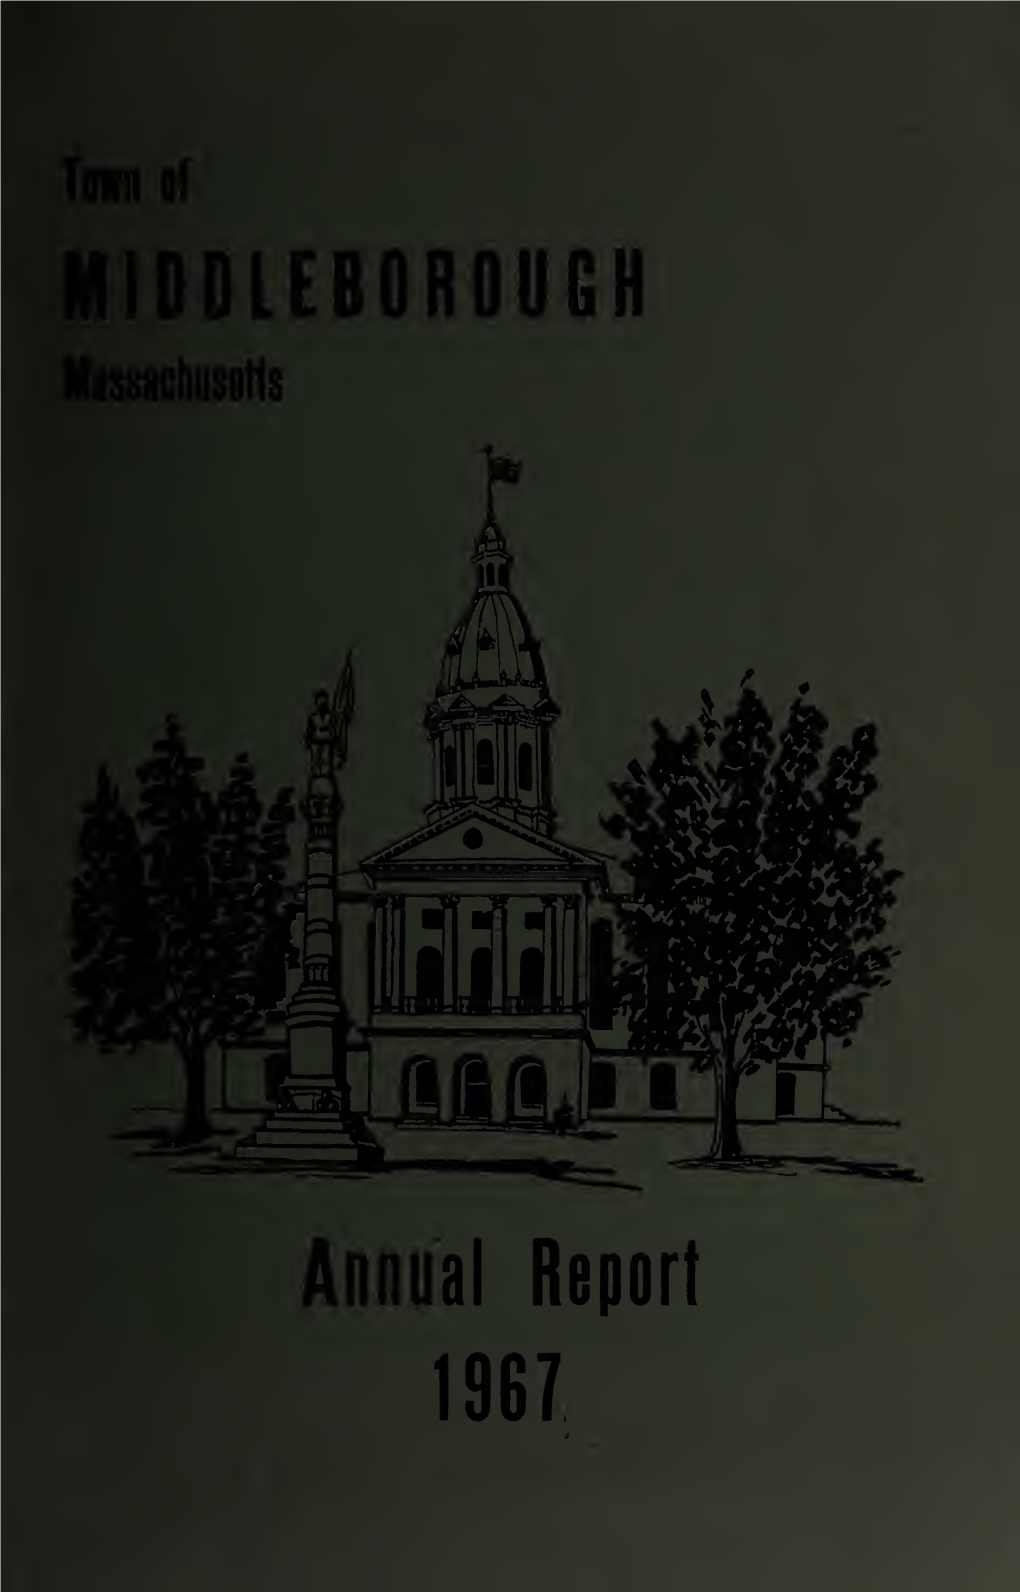 Annual Report of the Town of Middleborough, Massachusetts